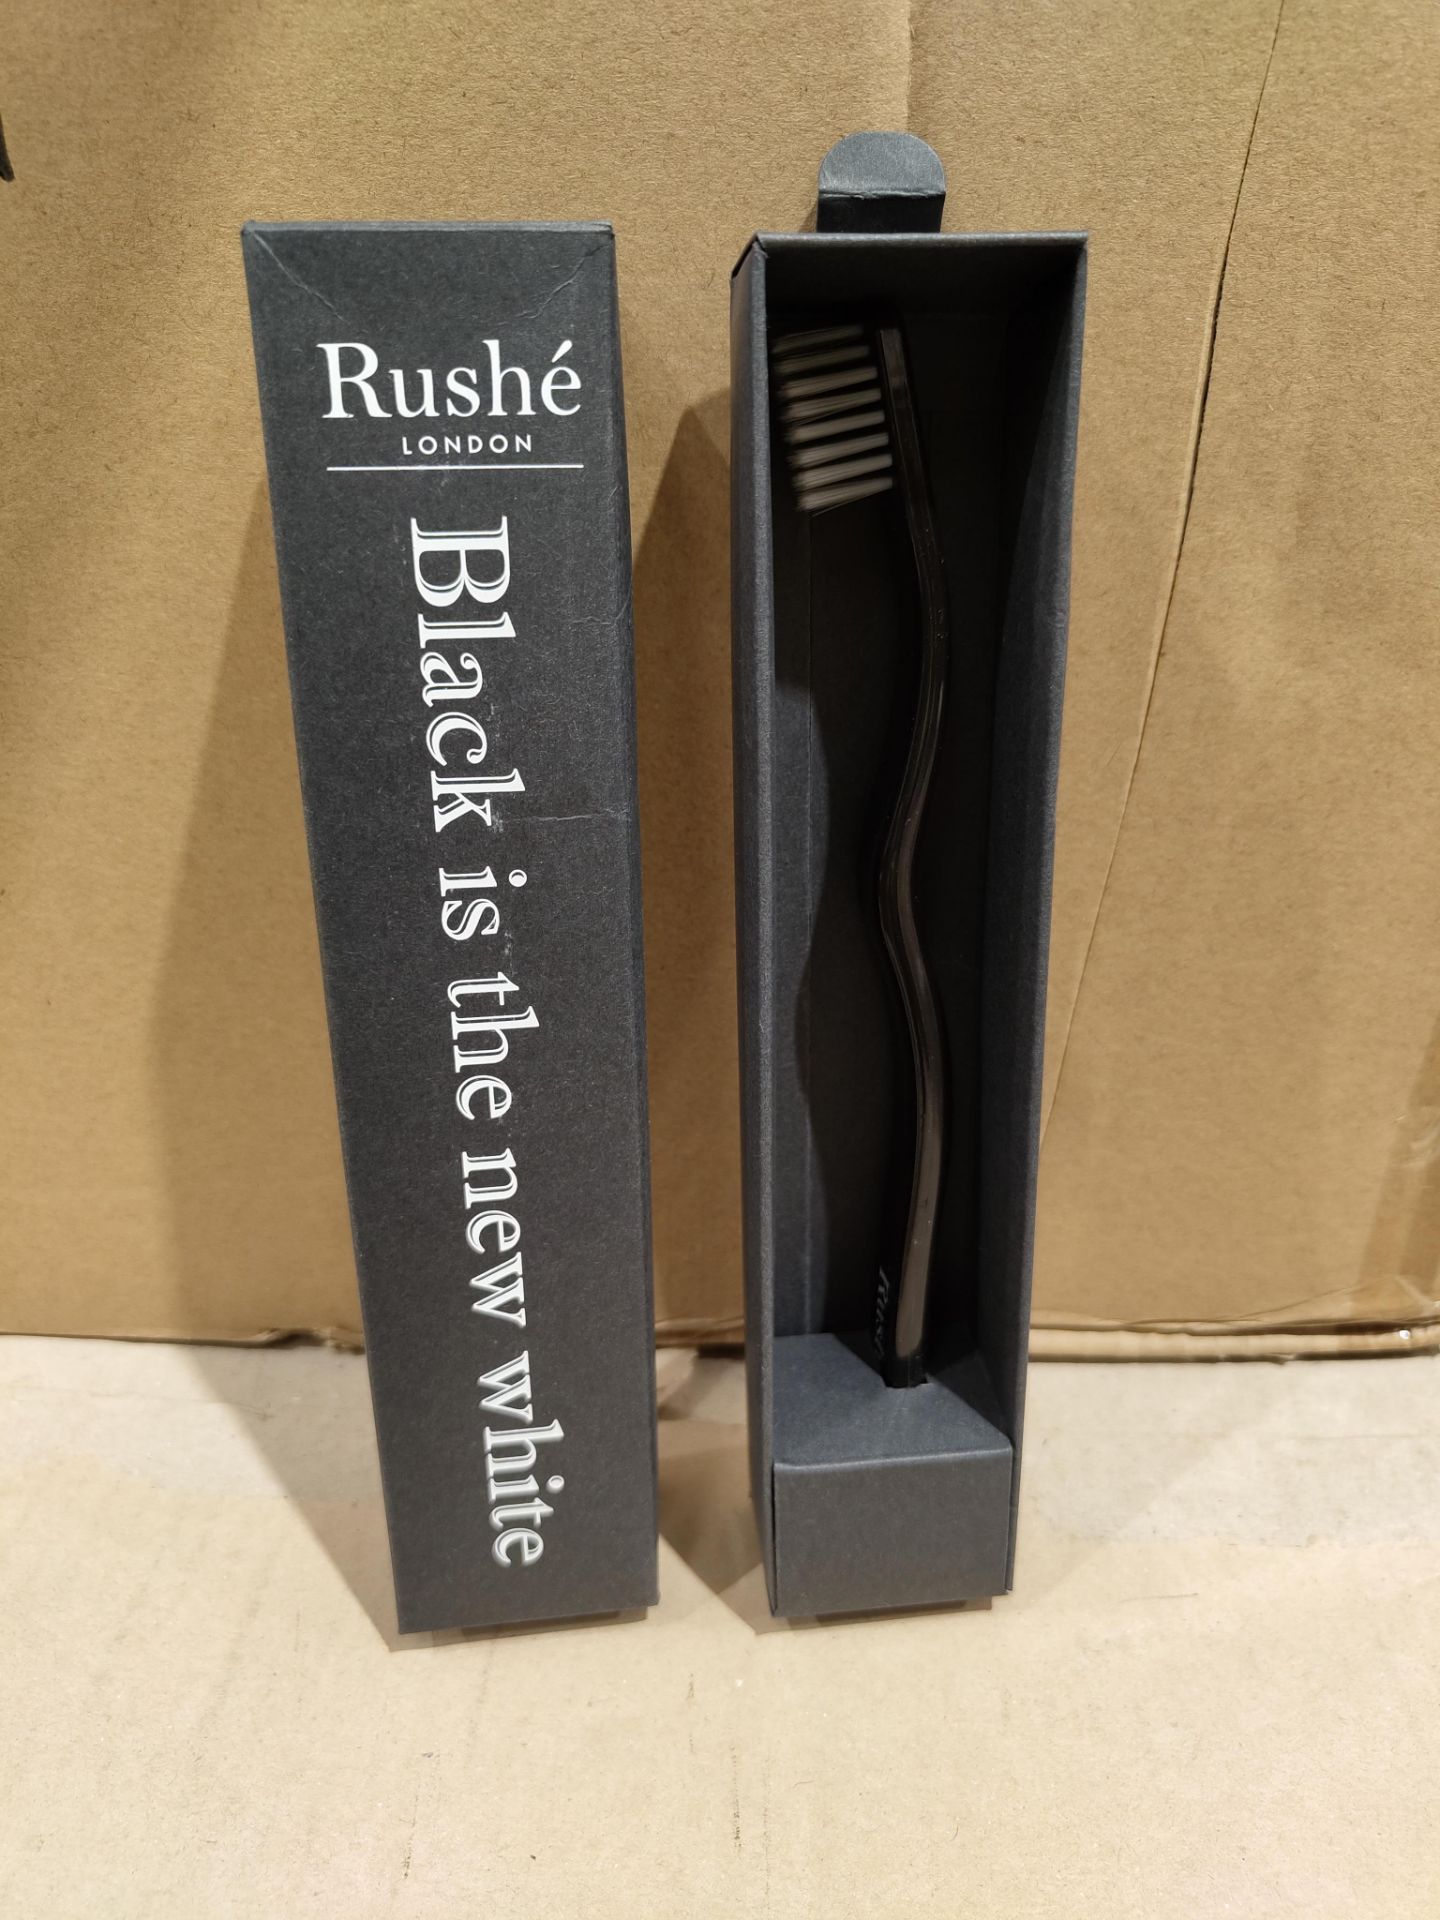 1000 X BRAND NEW RUSHE LONDON BLACK IS THE NEW WHITE TOOTHBRUSHES RRP £7 EACH S1